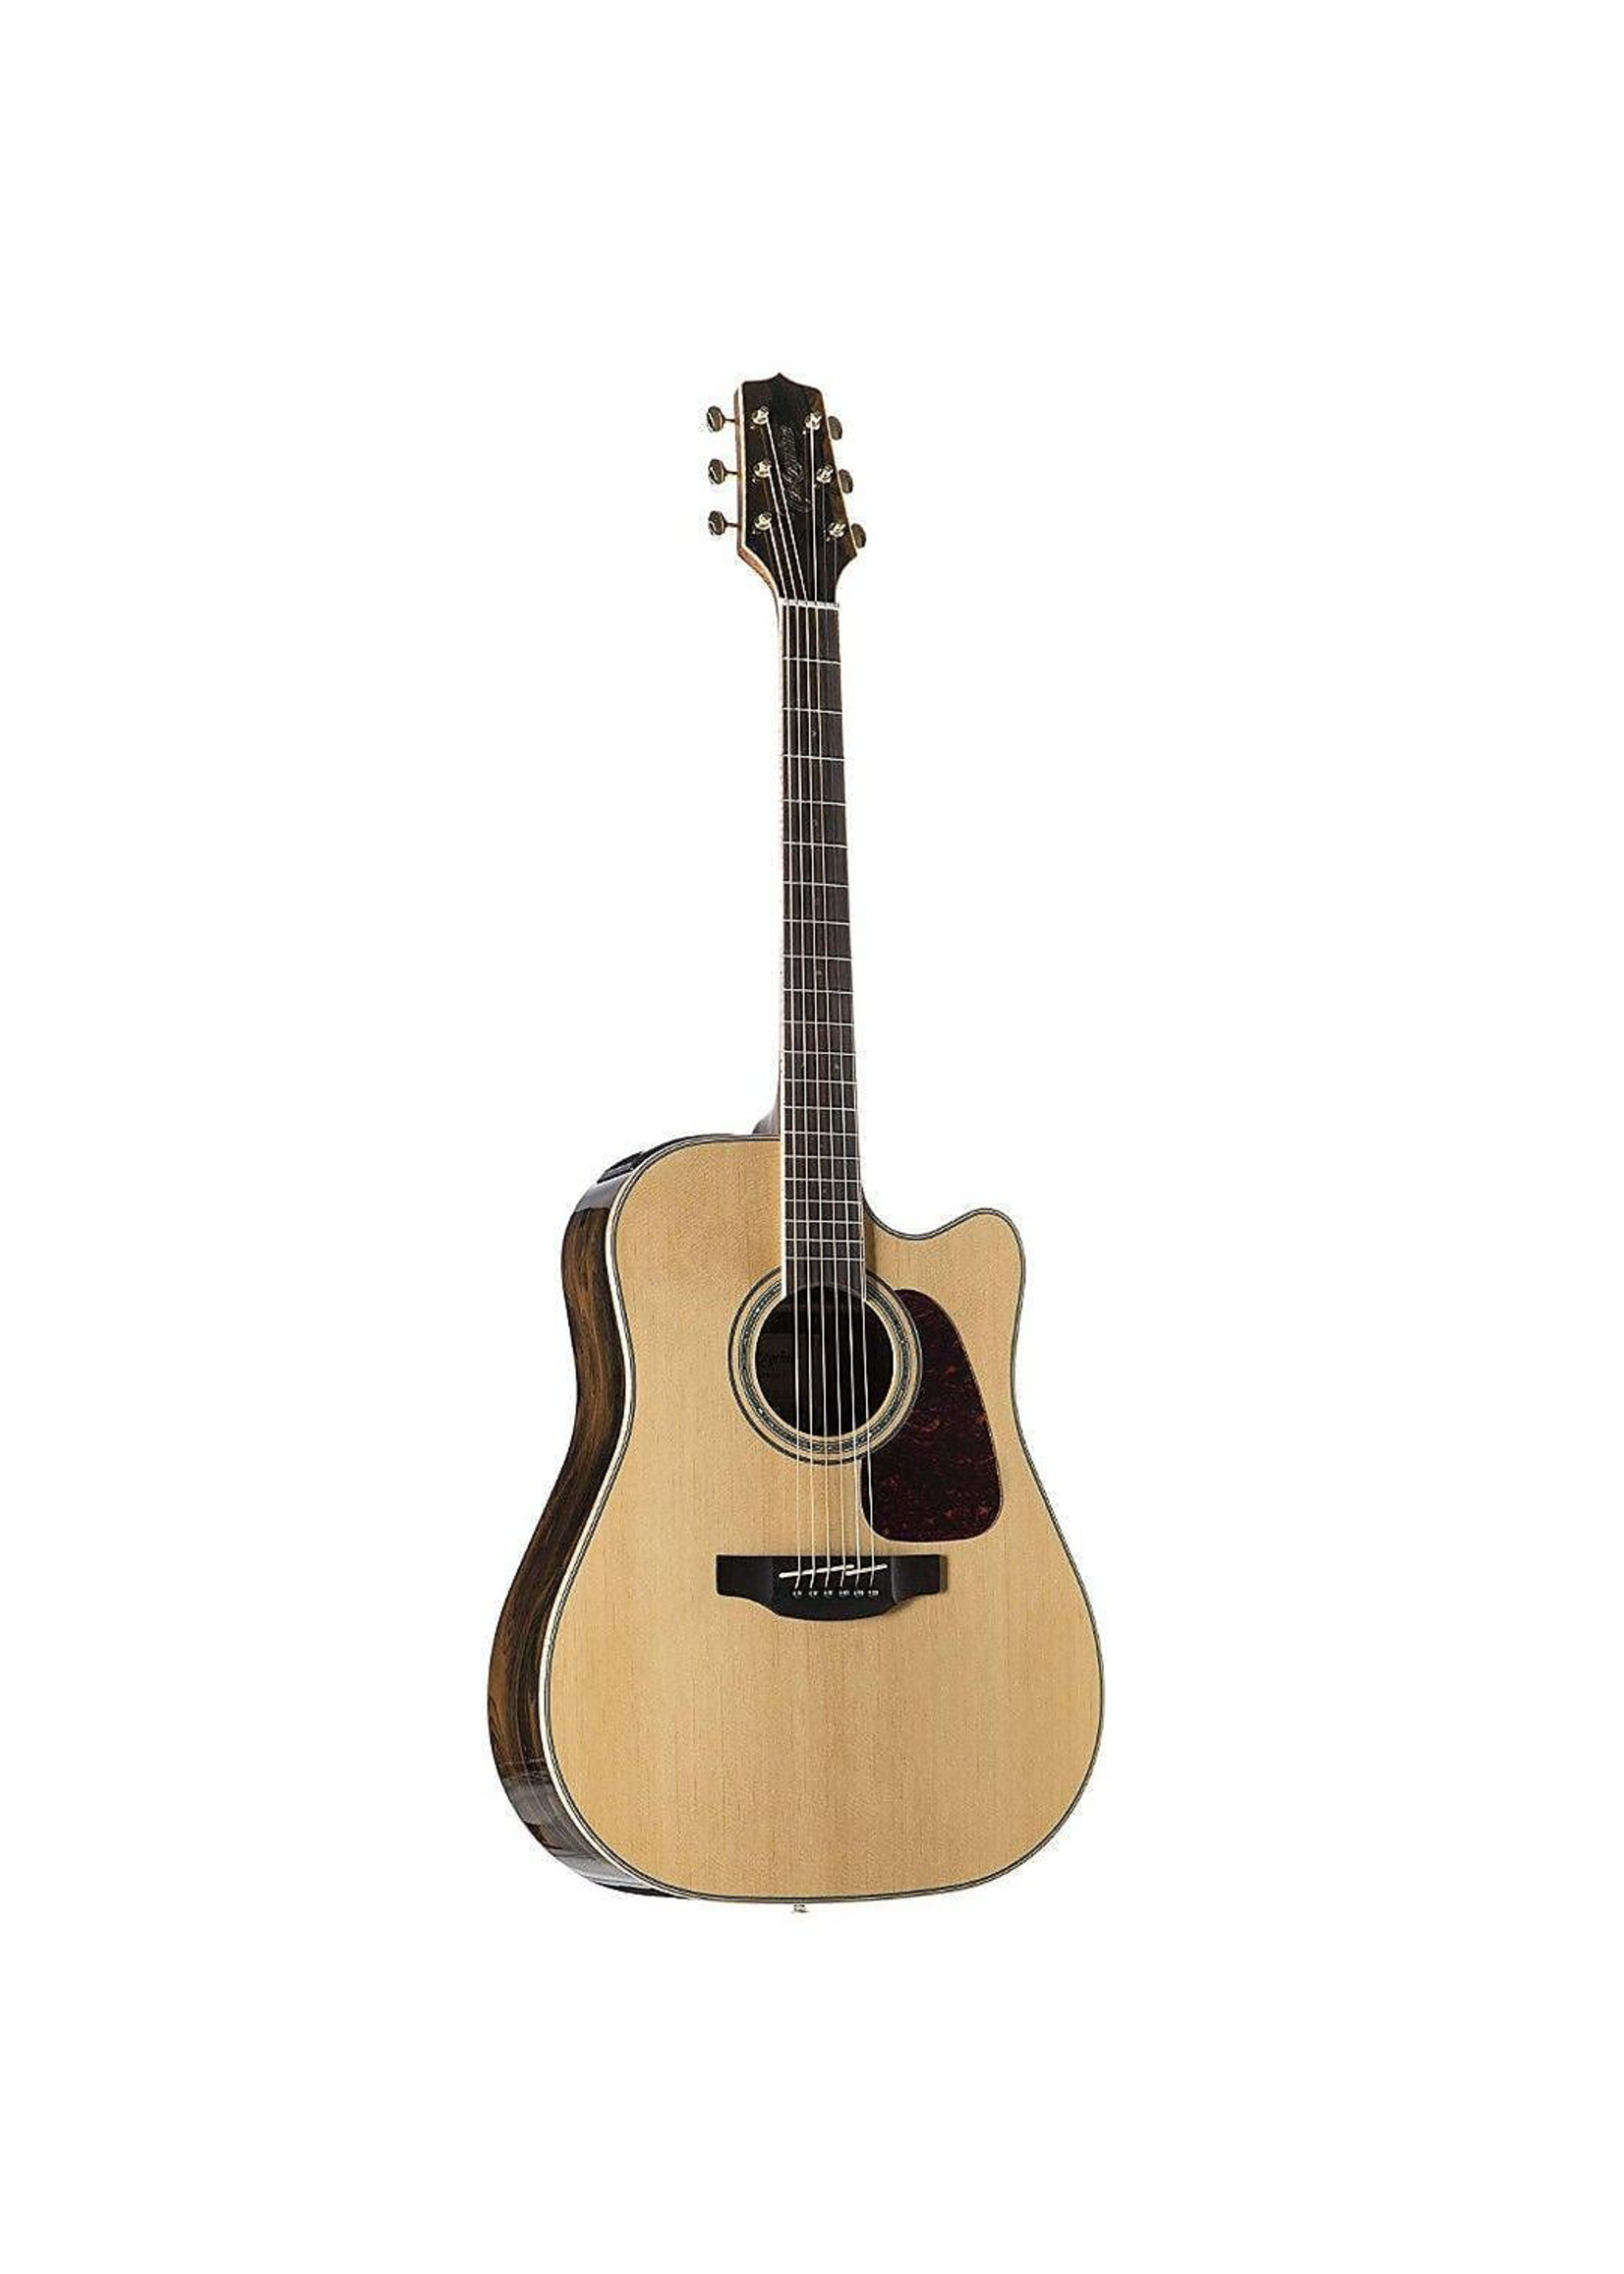 Takamine Takamine GD90CE-ZC Dreadnought Acoustic Electric Guitar Natural With Gig Bag